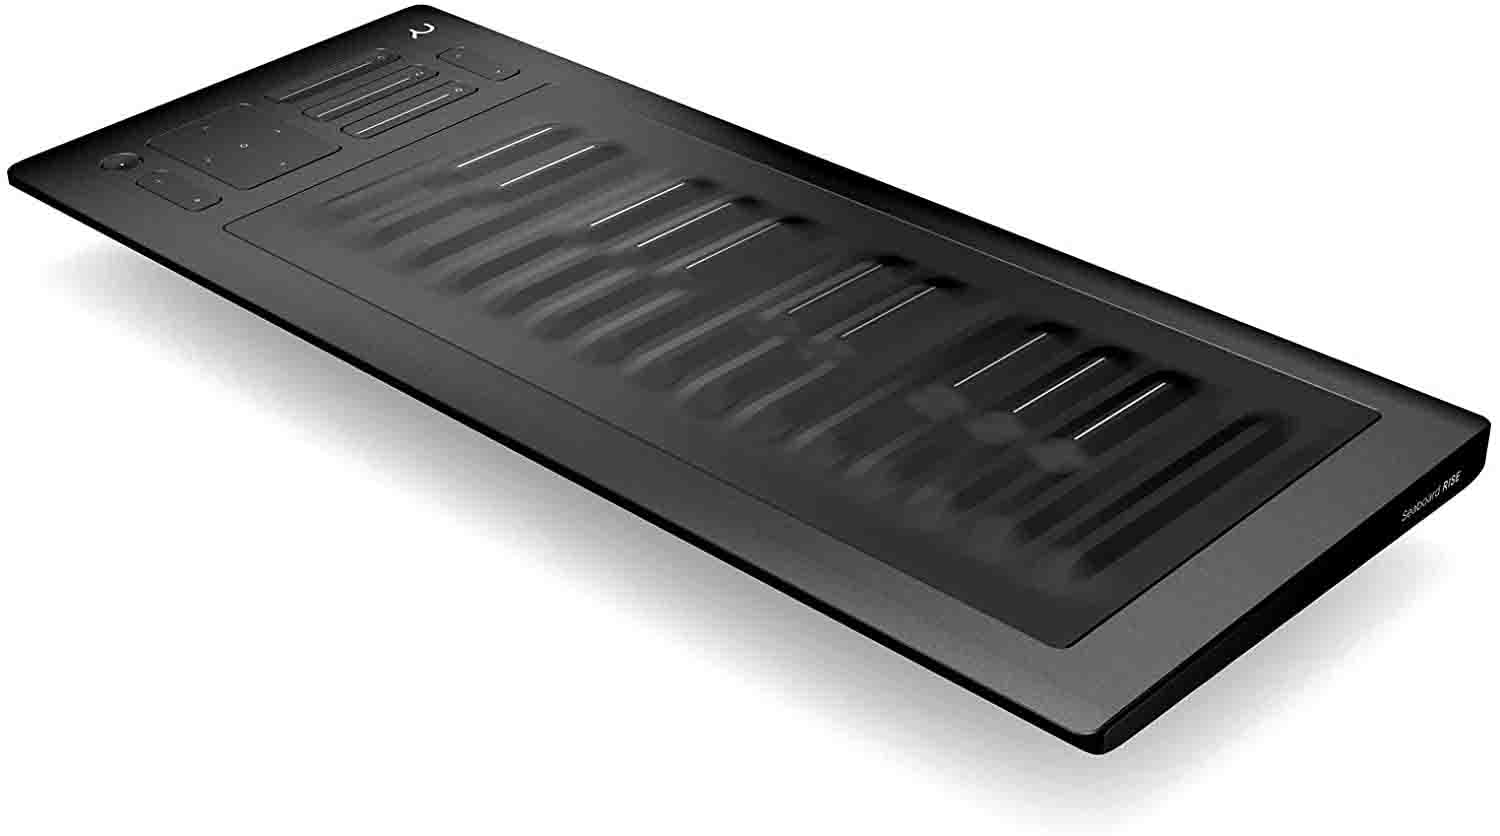 ROLI Seaboard RISE25 25-Note USB Keyboard Controller and Synthesizer - Hollywood DJ